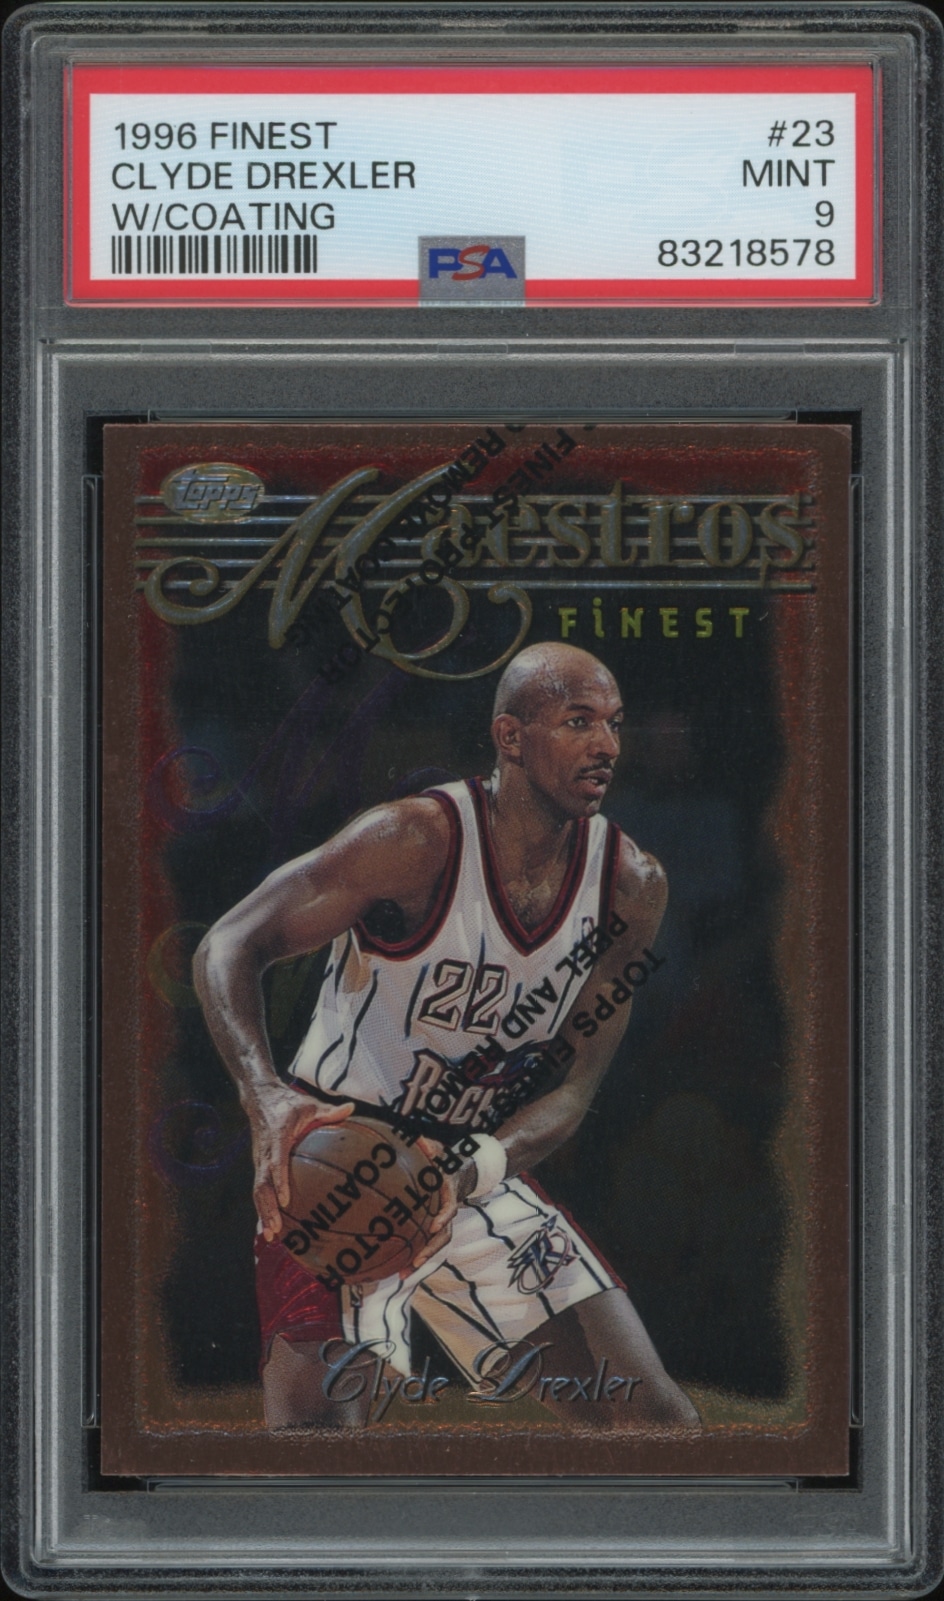 Clyde Drexlers Mint 9, 1996 Finest basketball card with unique PSA grading.